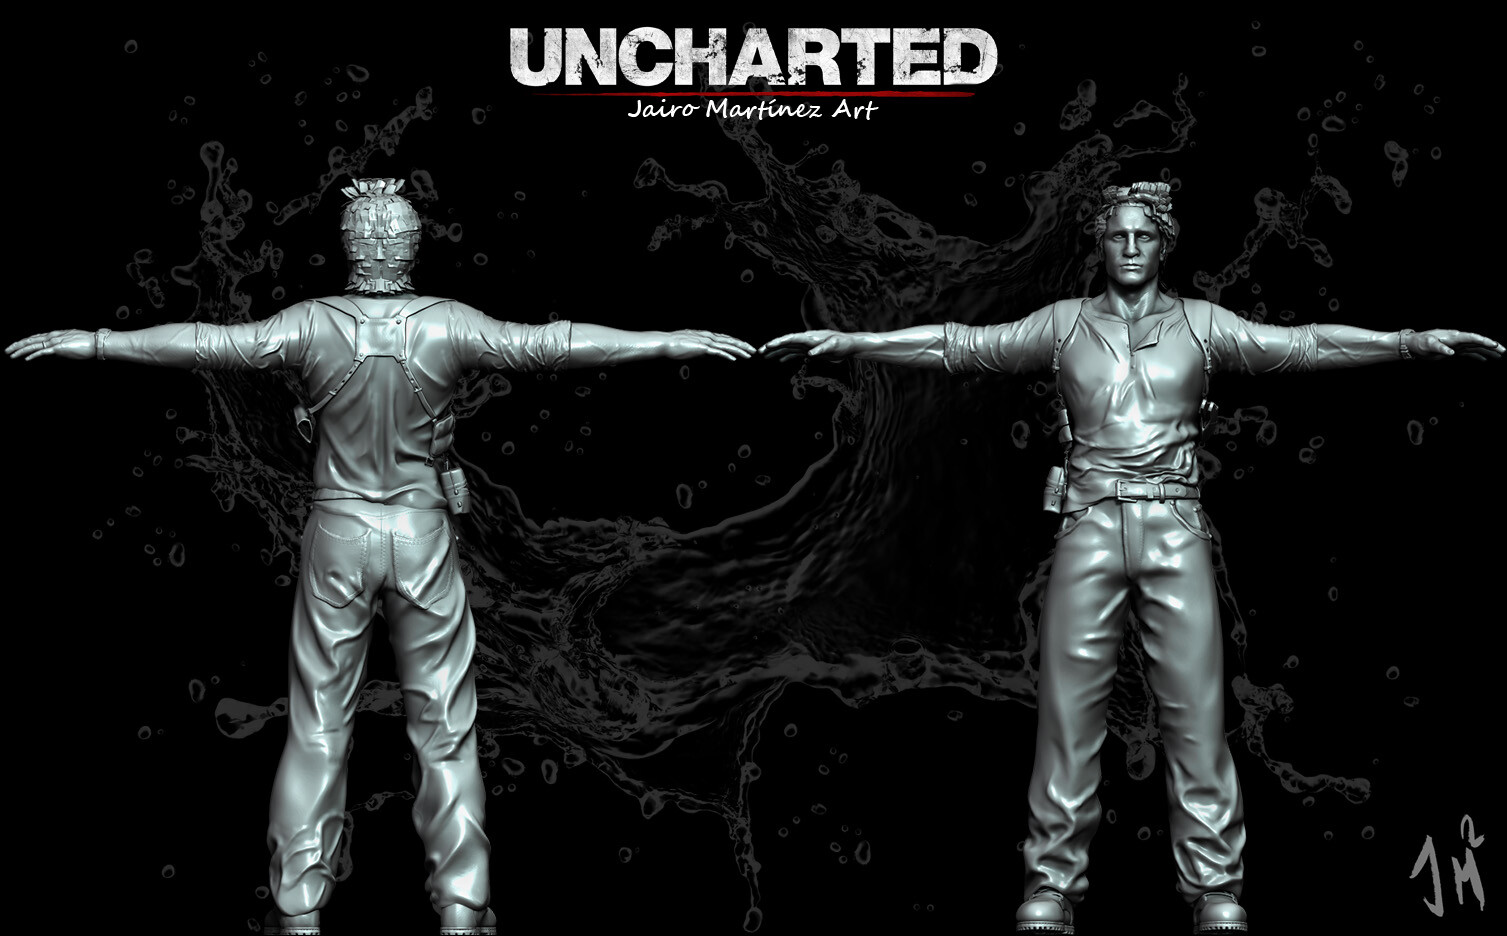 Uncharted 4: Cradle of Destiny (comp) by fzero on DeviantArt